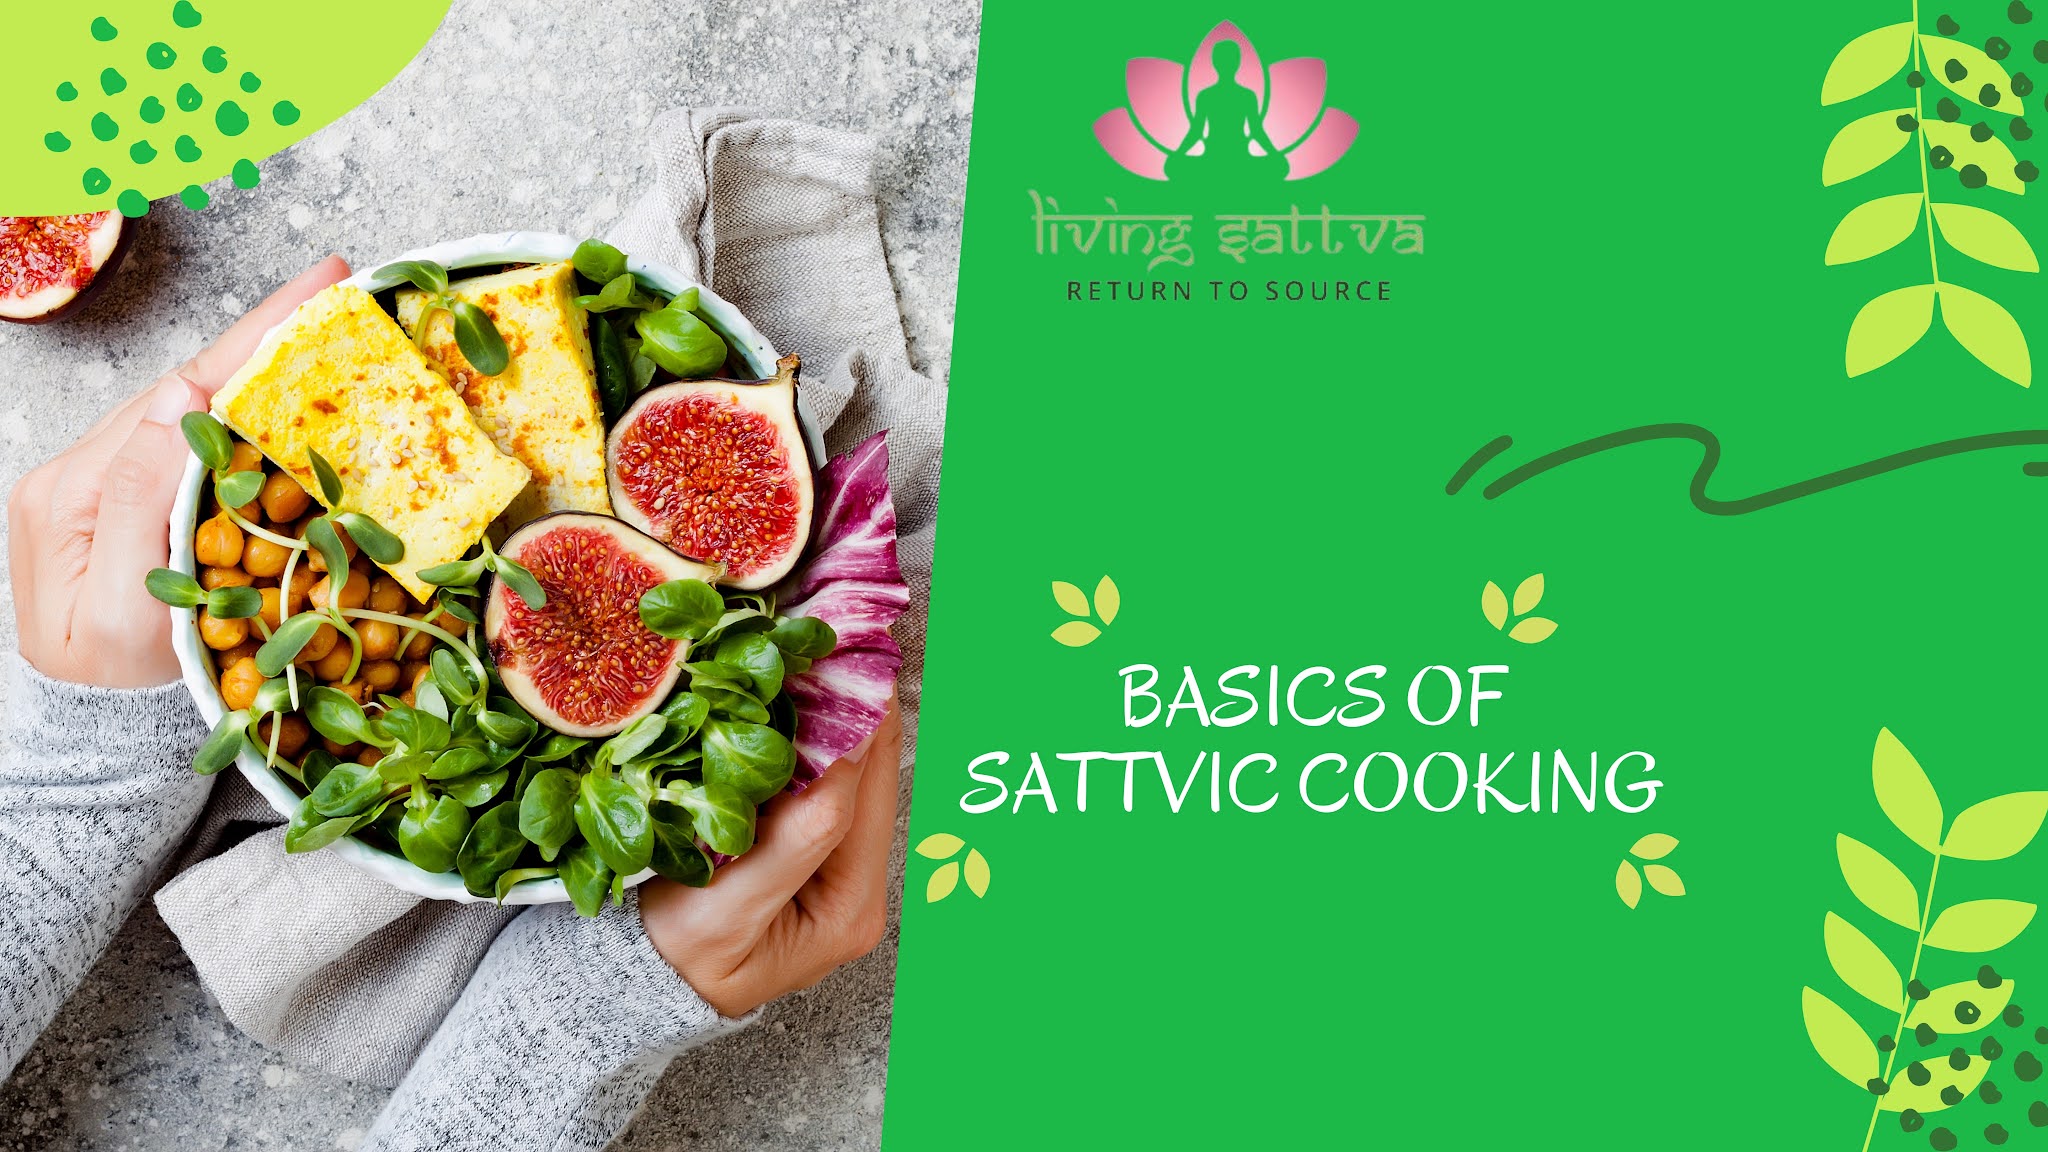 Basics of sattvic cooking